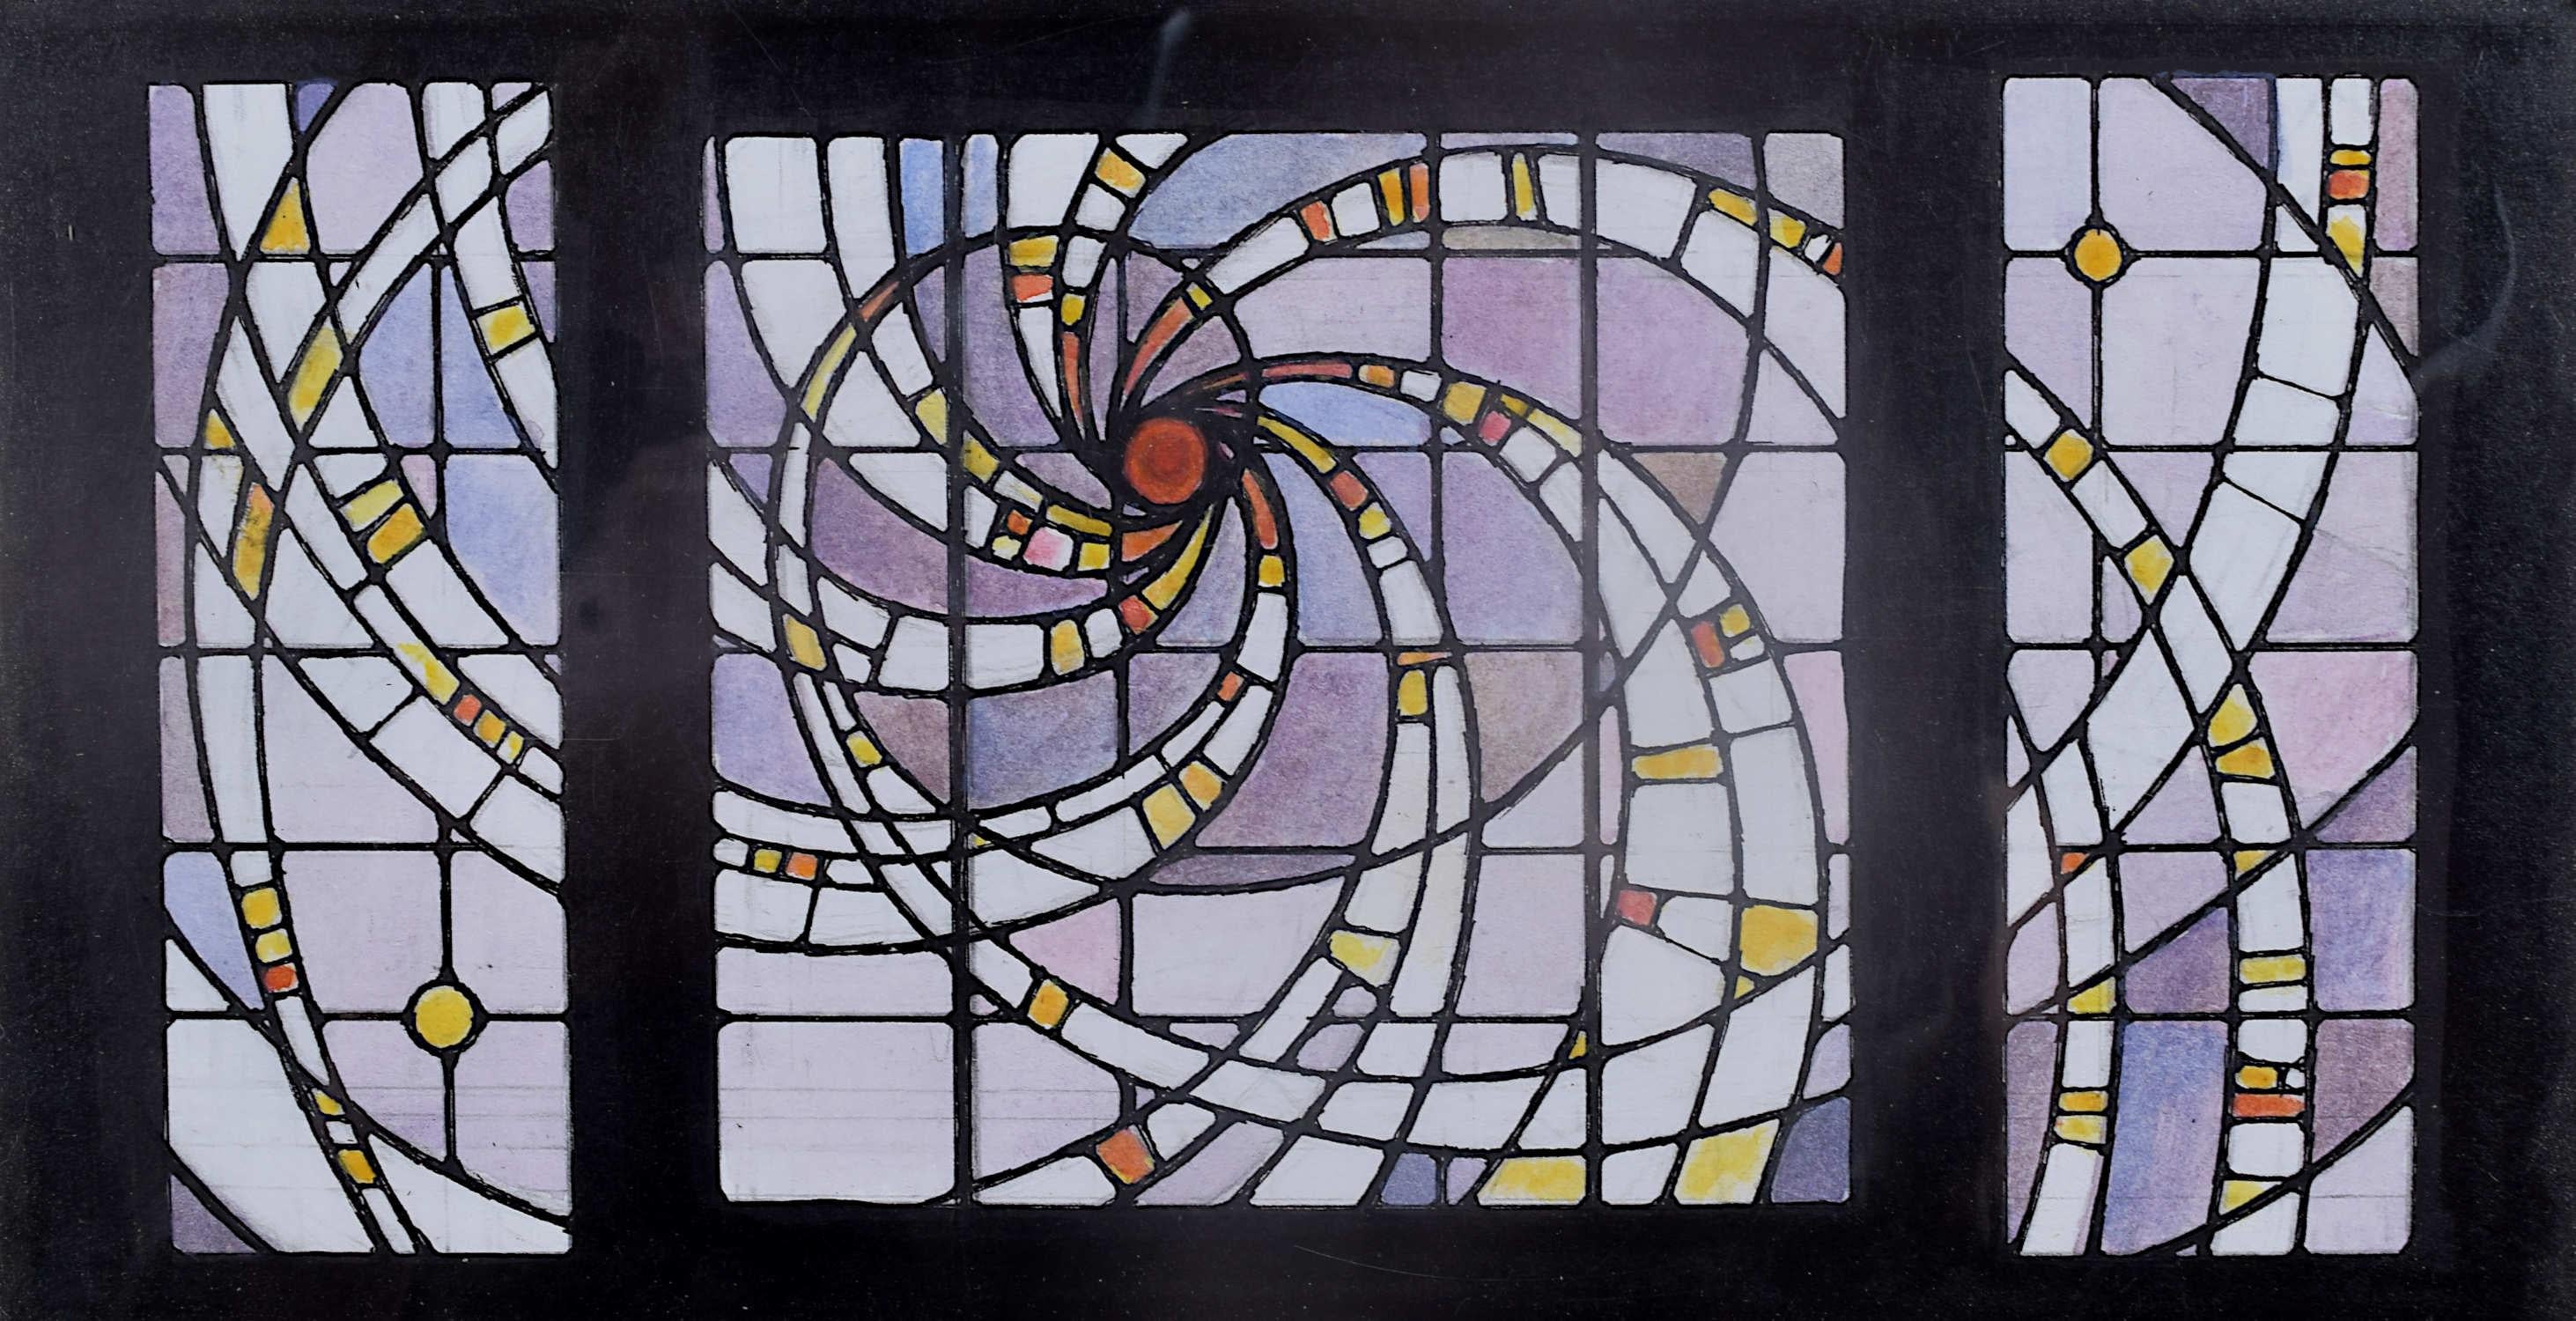 Mount Vernon Hospital, Watercolour Stained Glass Window Design, Jane Gray